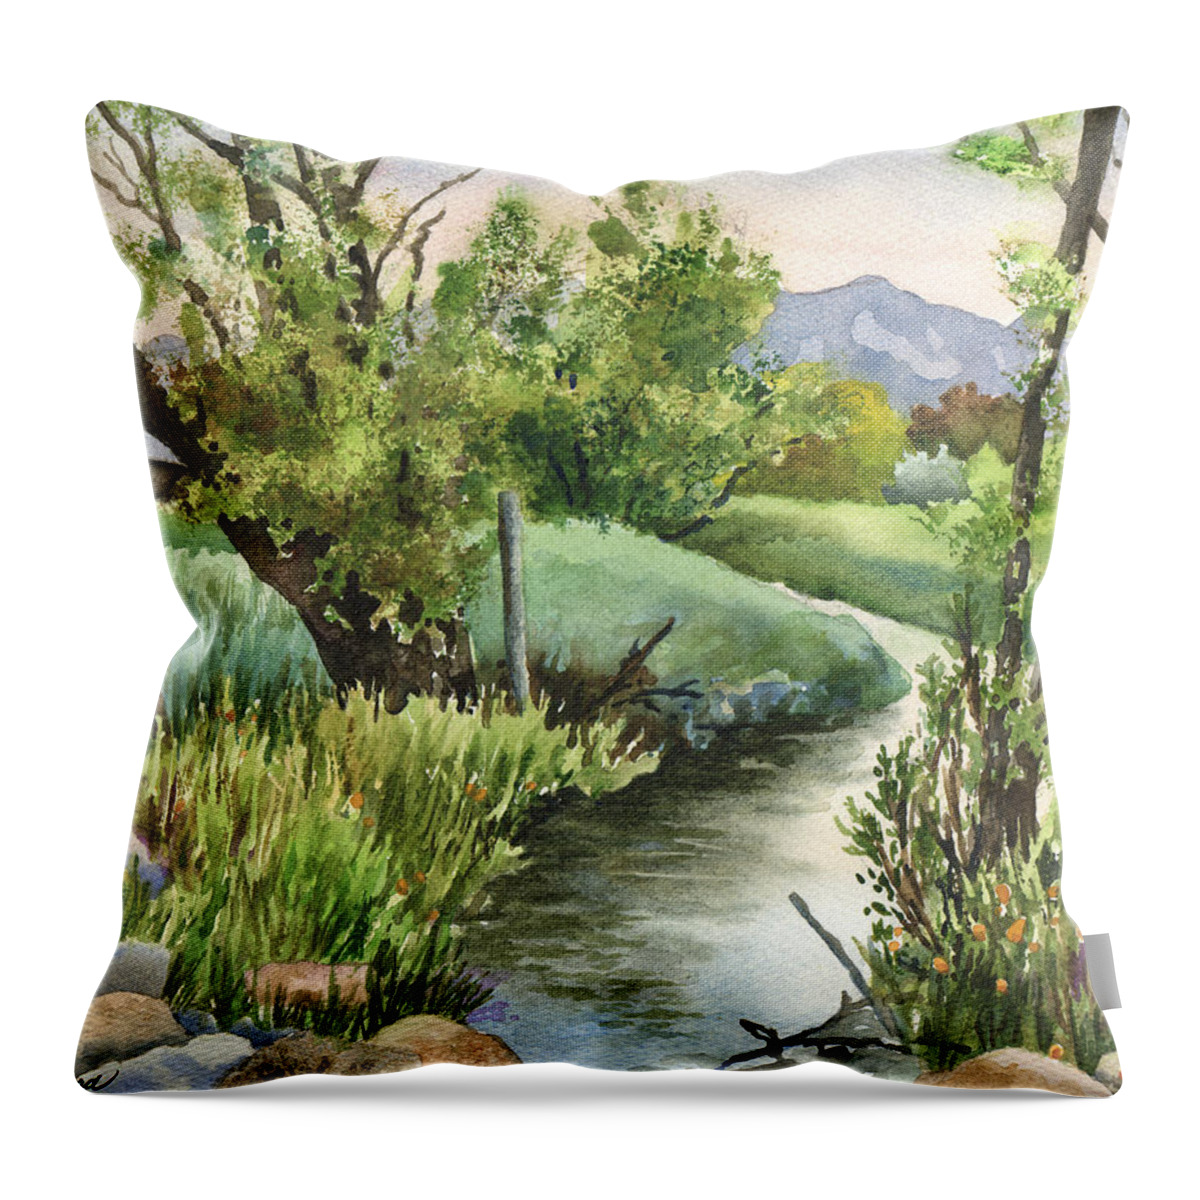 Landscape Painting Throw Pillow featuring the painting South Boulder Creek by Anne Gifford